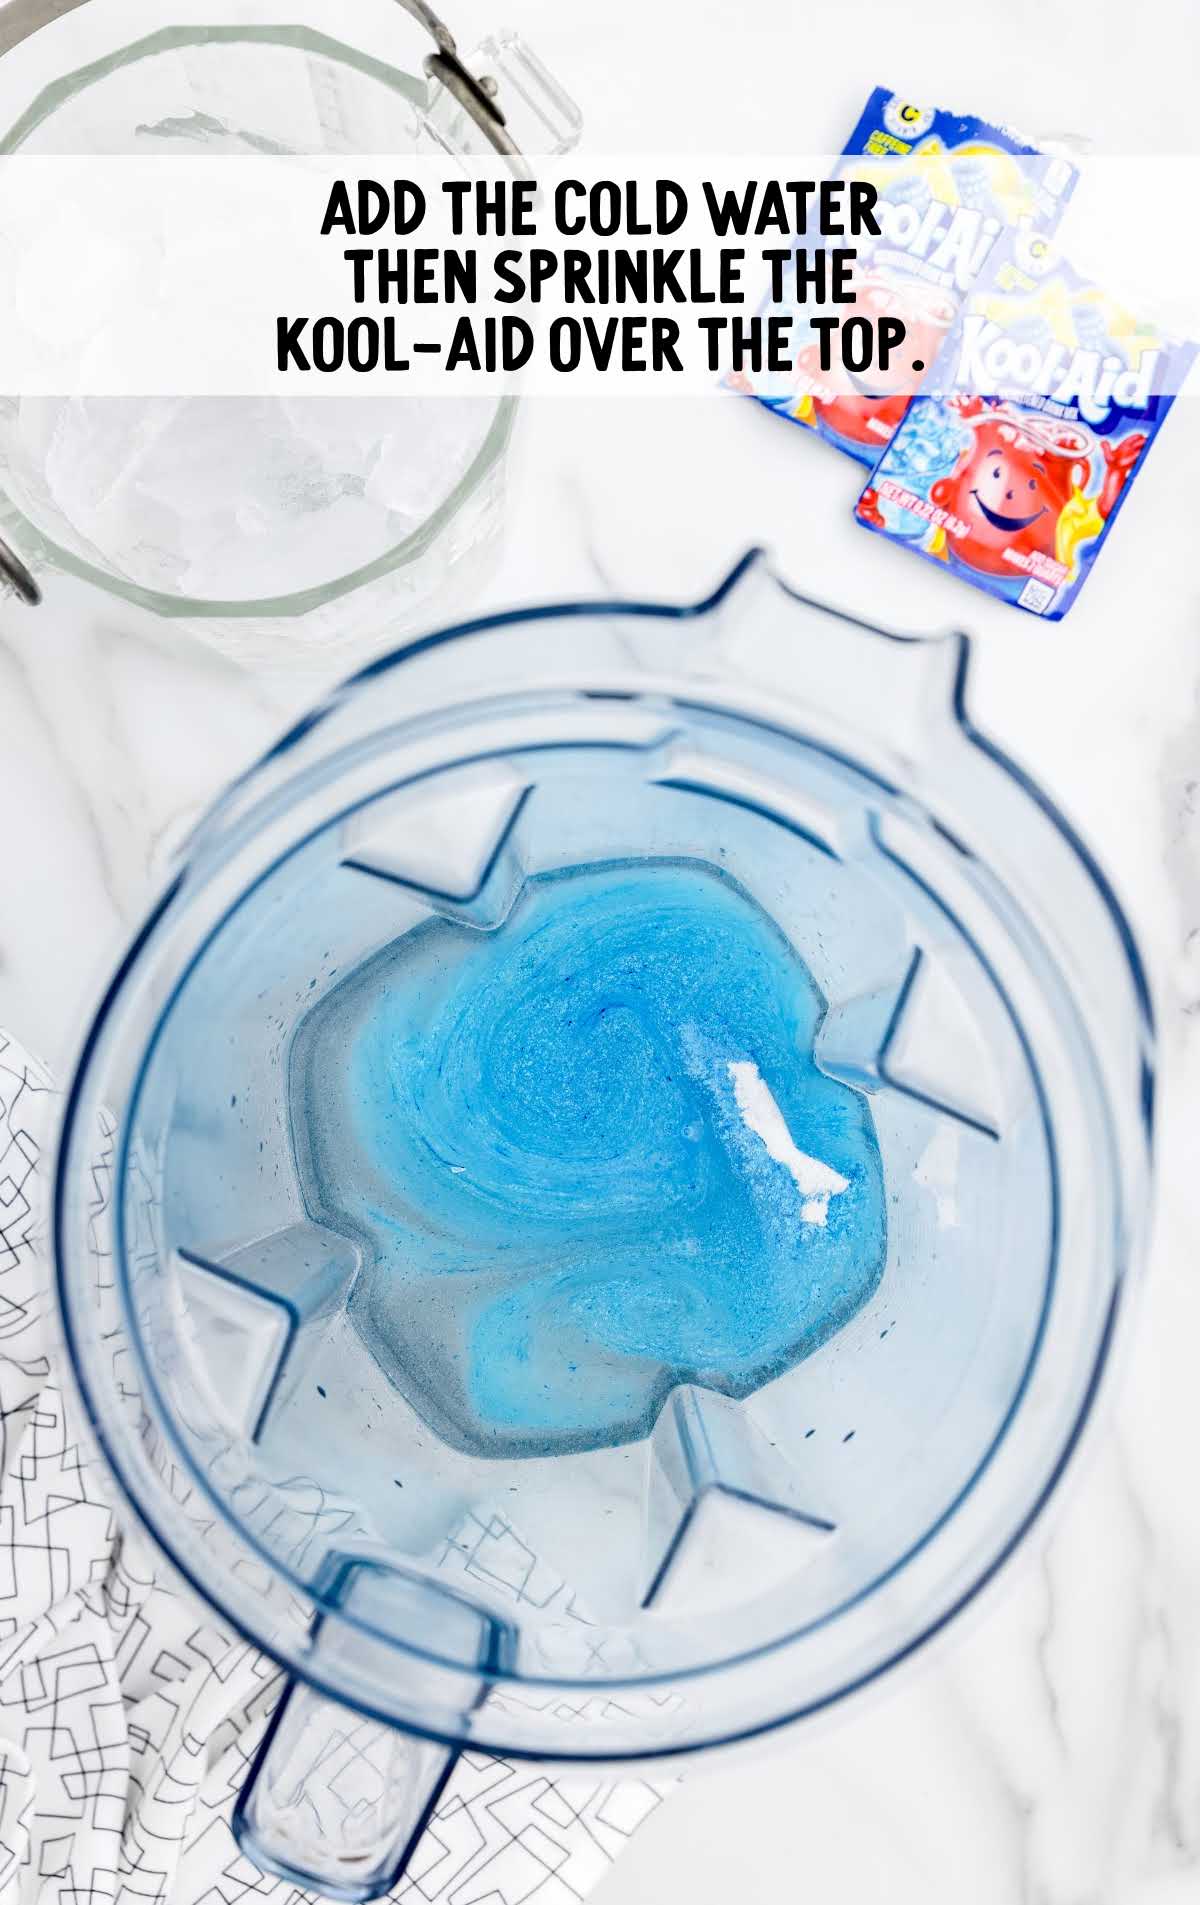 cold water and kool-aid packets added to the blender